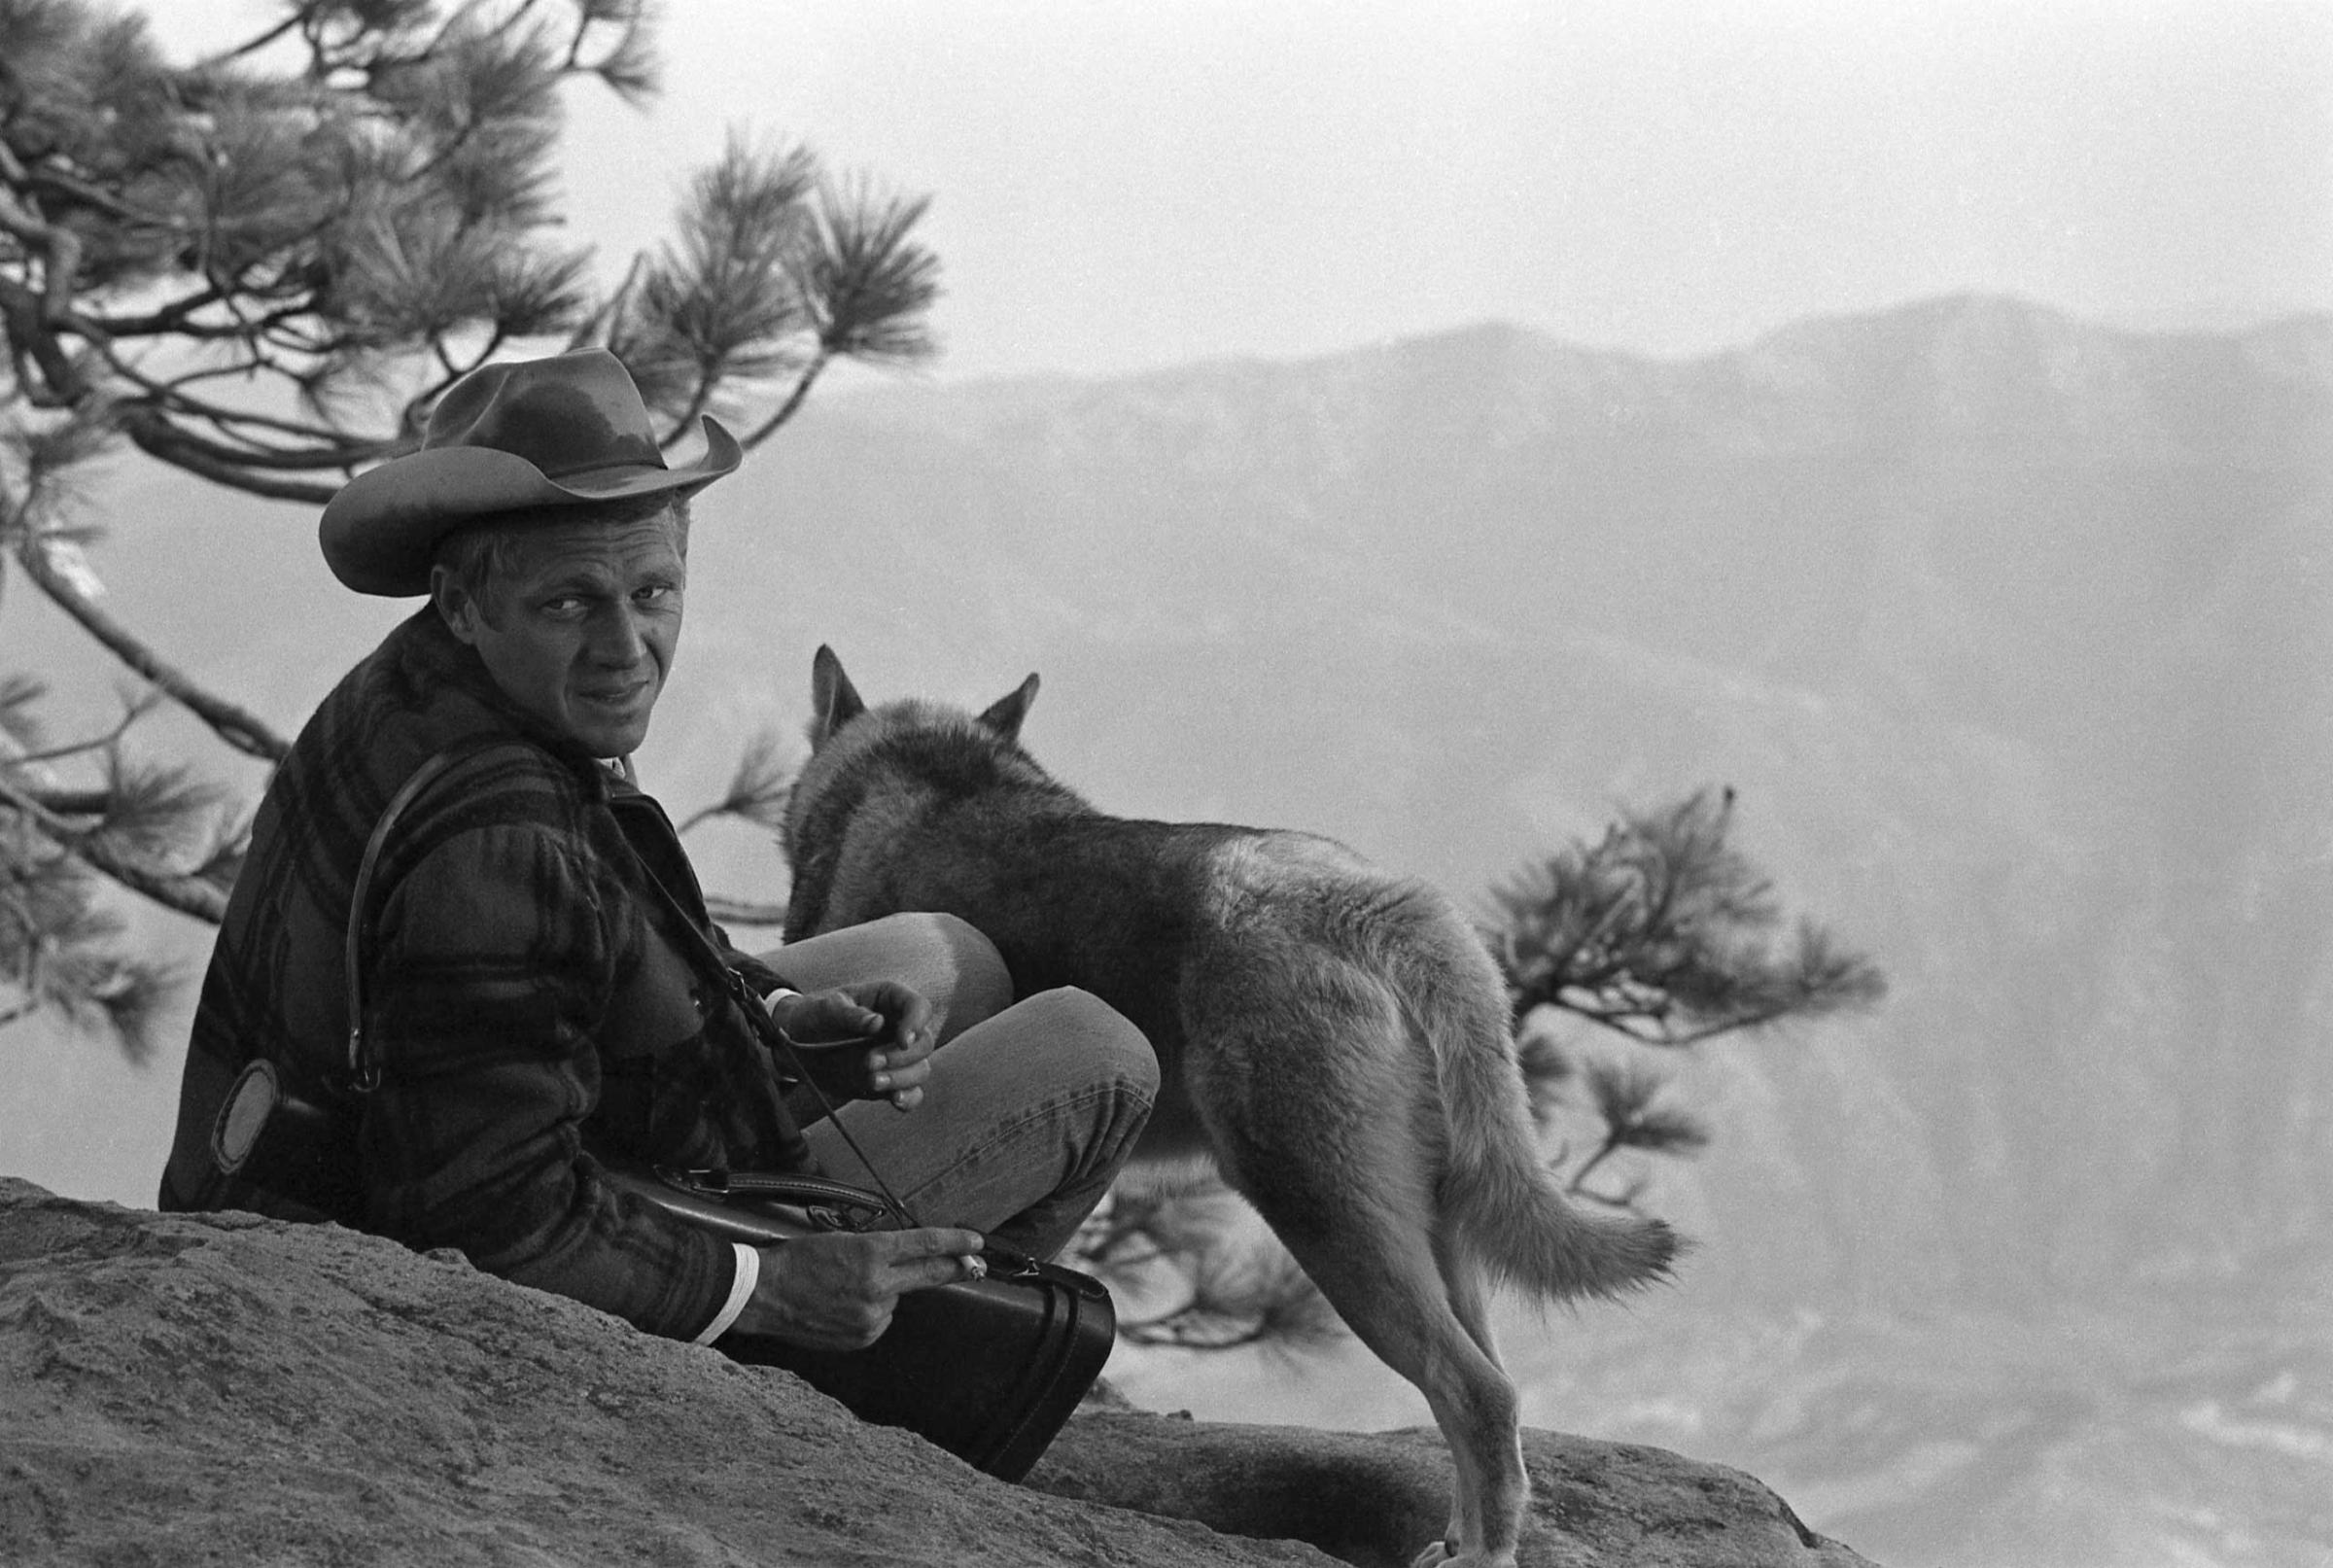 With his dog, a Malamute named Mike, by his side, Steve McQueen takes in the scenery, California, 1963.